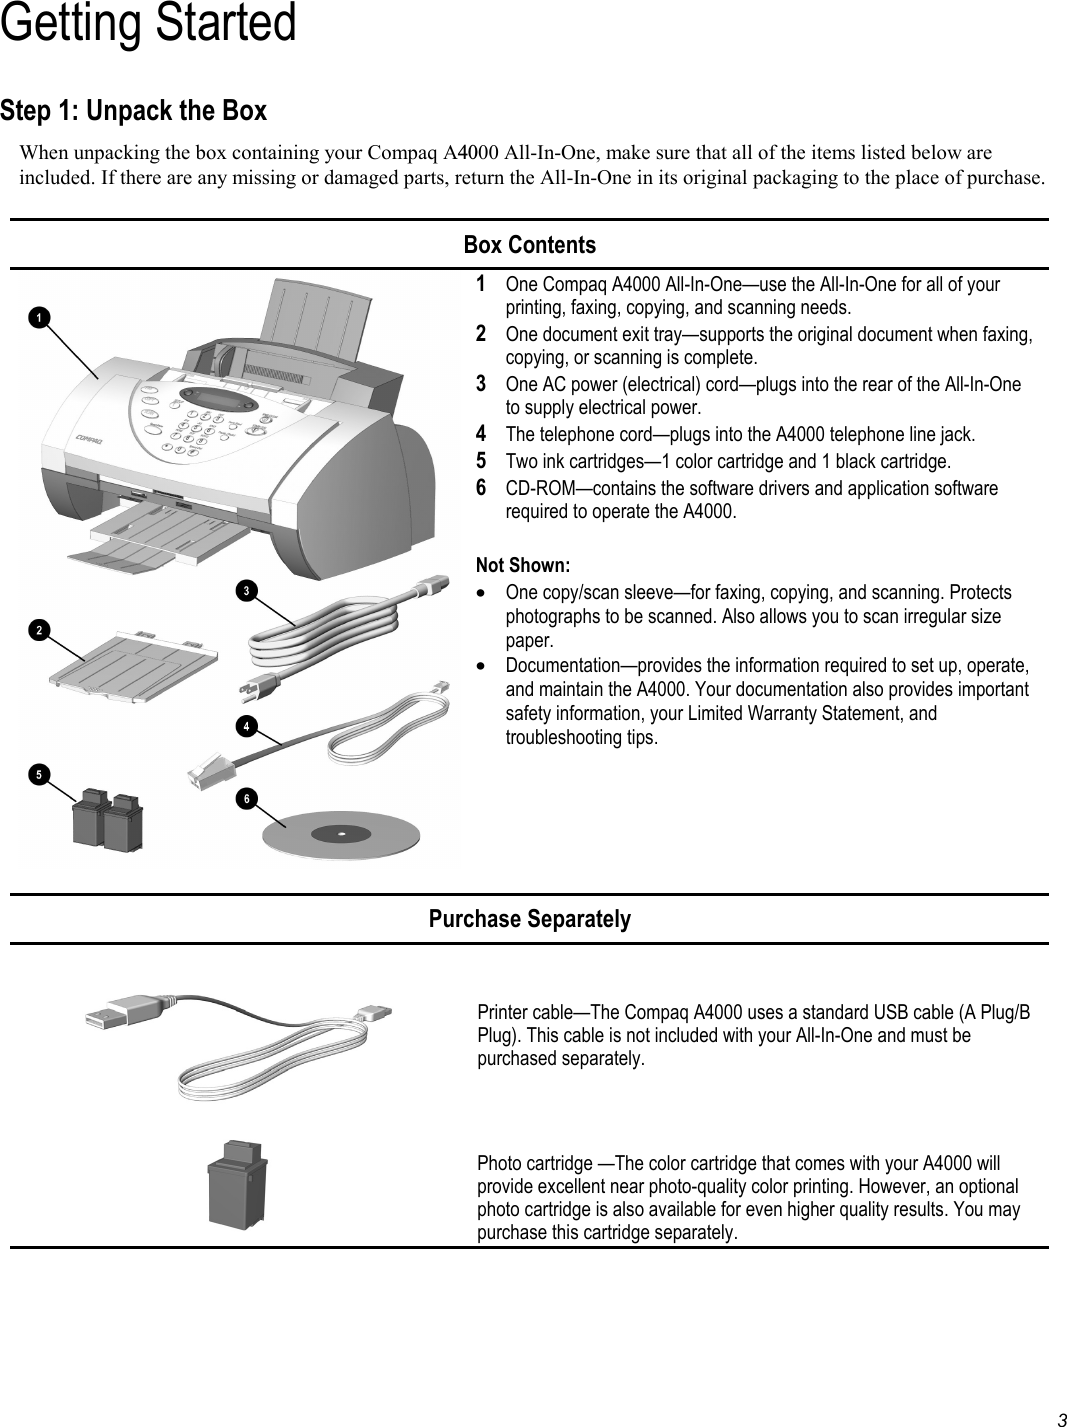   3 Getting Started Step 1: Unpack the Box When unpacking the box containing your Compaq A4000 All-In-One, make sure that all of the items listed below are included. If there are any missing or damaged parts, return the All-In-One in its original packaging to the place of purchase.   Box Contents  1 One Compaq A4000 All-In-One—use the All-In-One for all of your printing, faxing, copying, and scanning needs.  2  One document exit tray—supports the original document when faxing, copying, or scanning is complete. 3 One AC power (electrical) cord—plugs into the rear of the All-In-One to supply electrical power. 4 The telephone cord—plugs into the A4000 telephone line jack. 5 Two ink cartridges—1 color cartridge and 1 black cartridge. 6 CD-ROM—contains the software drivers and application software required to operate the A4000.  Not Shown: •  One copy/scan sleeve—for faxing, copying, and scanning. Protects photographs to be scanned. Also allows you to scan irregular size paper.  •  Documentation—provides the information required to set up, operate, and maintain the A4000. Your documentation also provides important safety information, your Limited Warranty Statement, and troubleshooting tips.   Purchase Separately    Printer cable—The Compaq A4000 uses a standard USB cable (A Plug/B Plug). This cable is not included with your All-In-One and must be purchased separately.   Photo cartridge —The color cartridge that comes with your A4000 will provide excellent near photo-quality color printing. However, an optional photo cartridge is also available for even higher quality results. You may purchase this cartridge separately.   